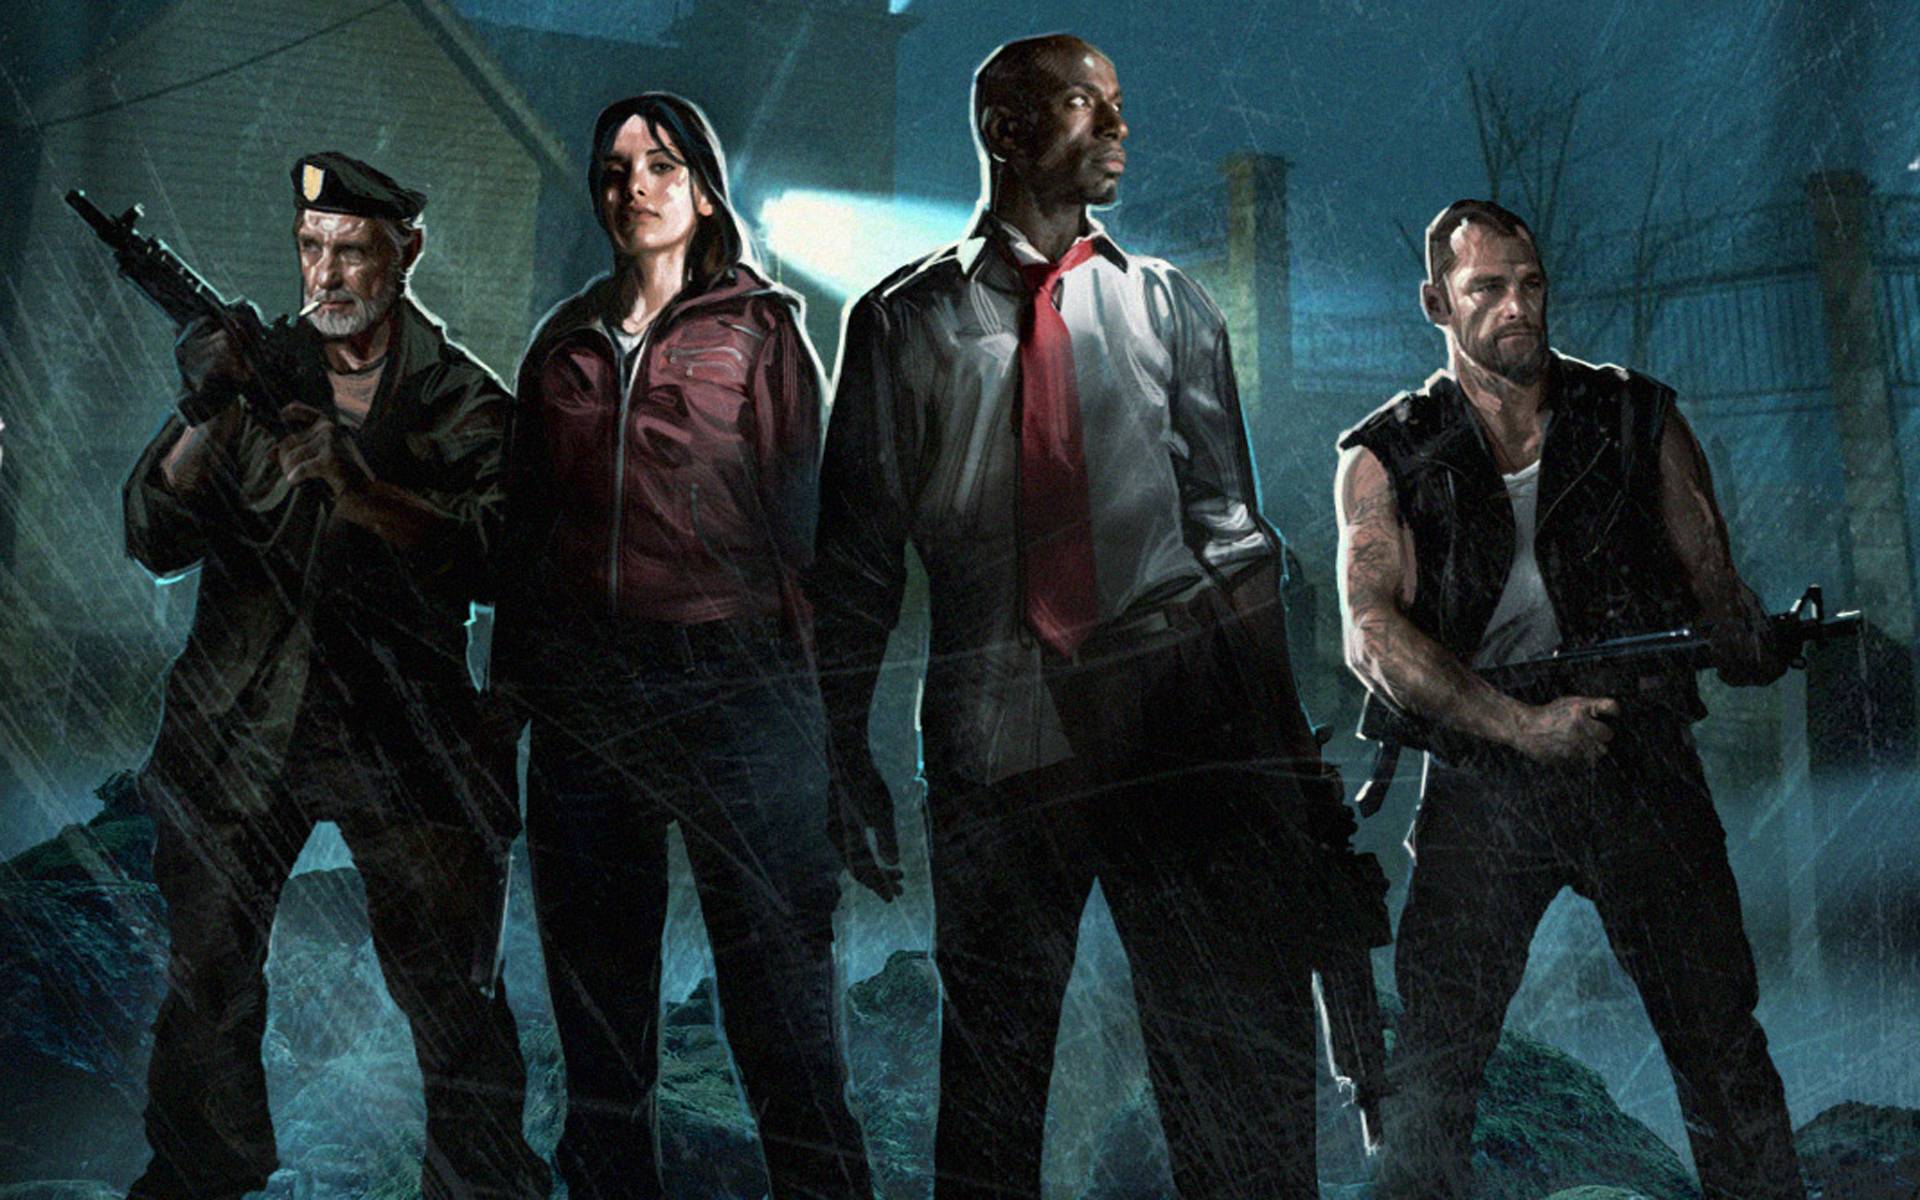 Wallpaper Left 4 Dead 1 4K : Free Download Left 4 Dead Hunter Wallpaper By Xxpariahsxx 1024x640 For Your Desktop Mobile Tablet Explore 49 Left 4 Dead Wallpaper L4d2 Wallpaper Left 4 Dead Hunter Wallpaper 1080p Left 4 Dead Wallpaper / A collection made for personal use, but i decided to release it in case anyone is need of it, even though there are that is if you played l4d1.